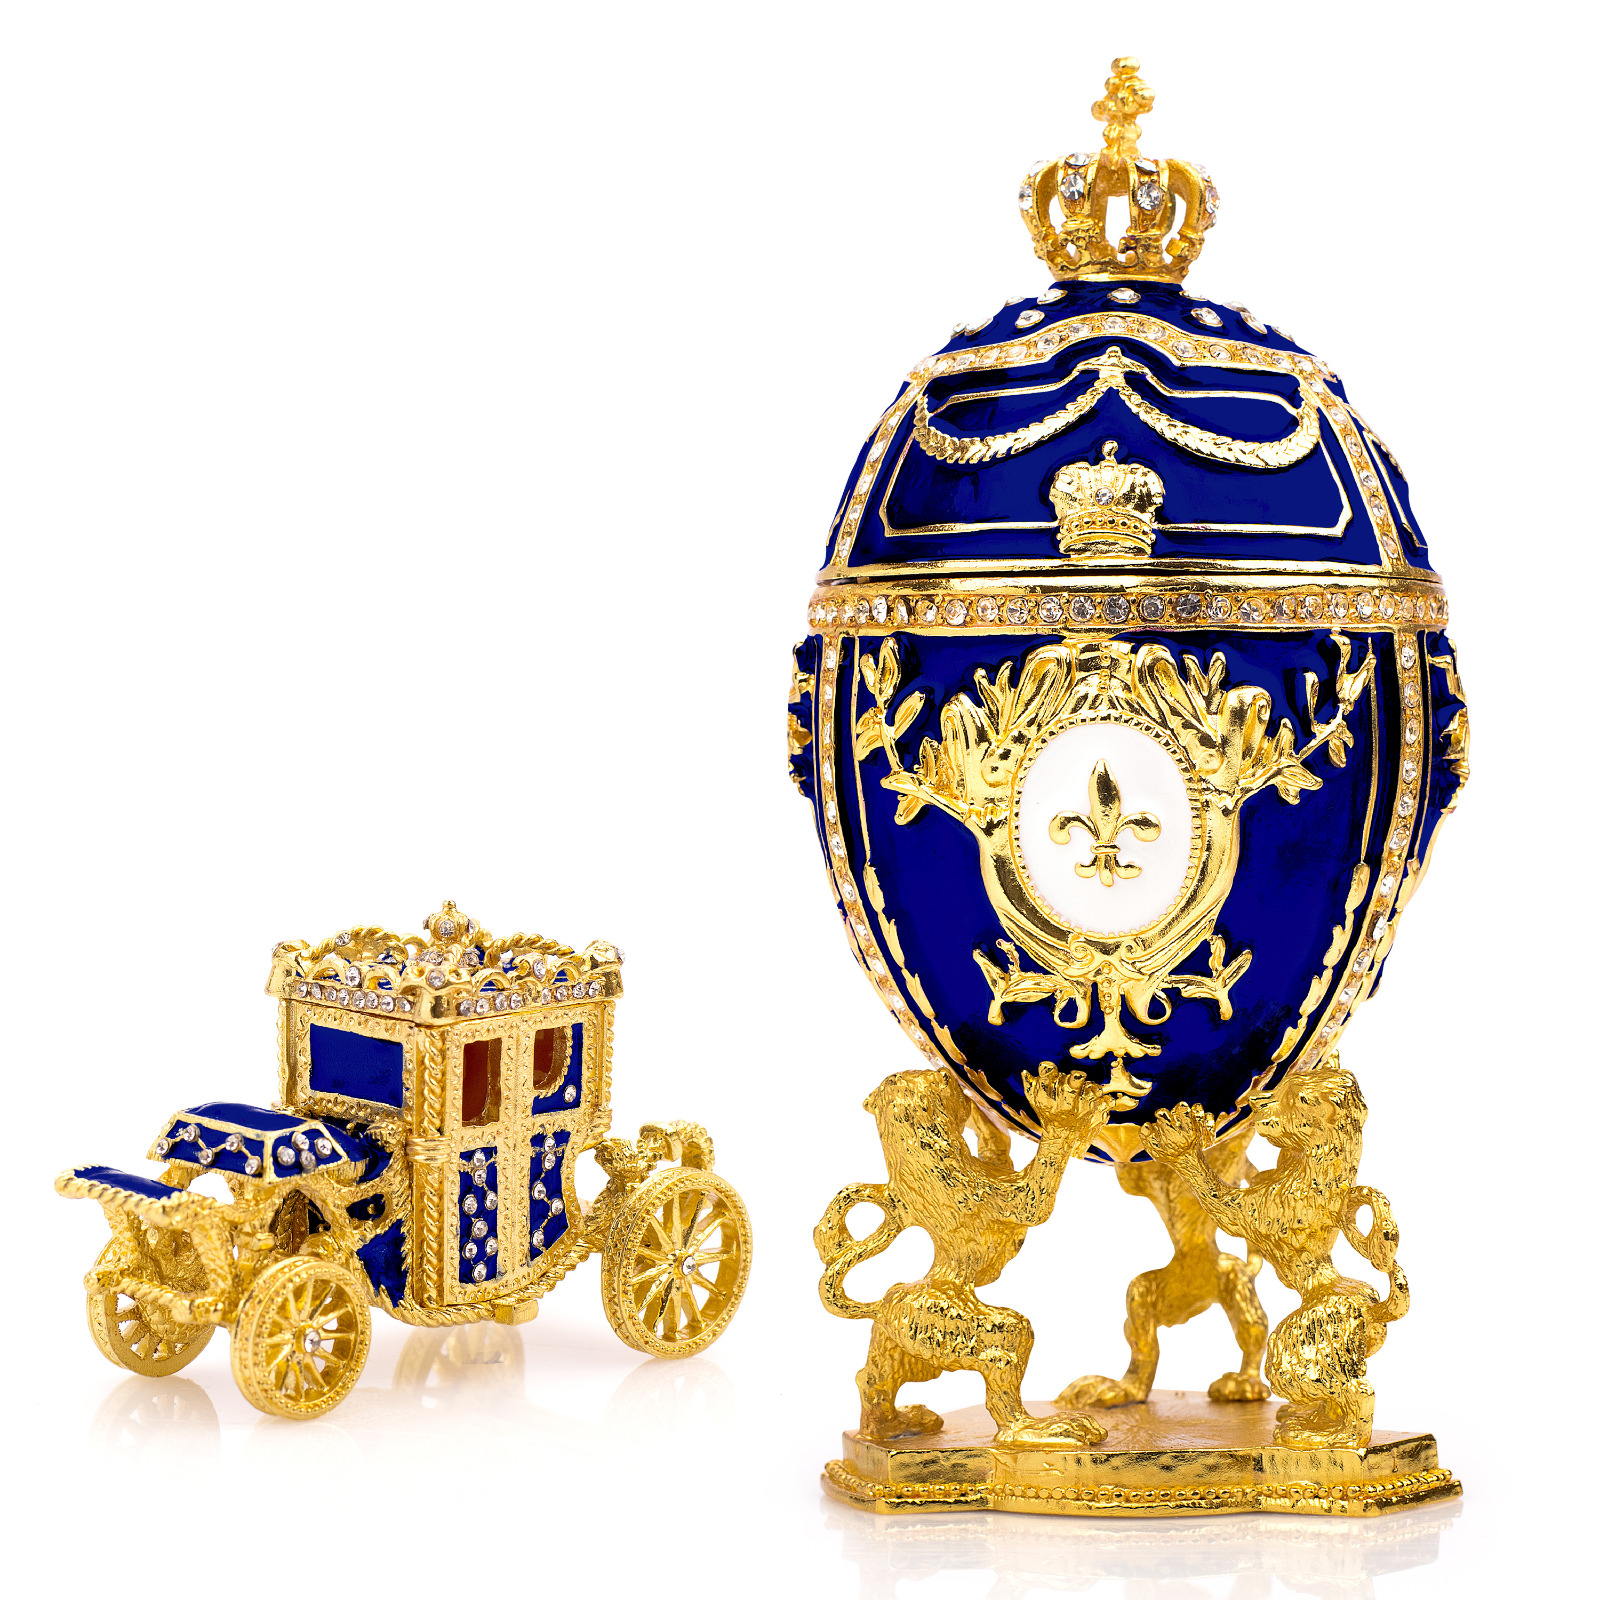 Royal Imperial Blue Faberge Egg Replica: Extra Large 6.6” with Carriage by Vtry